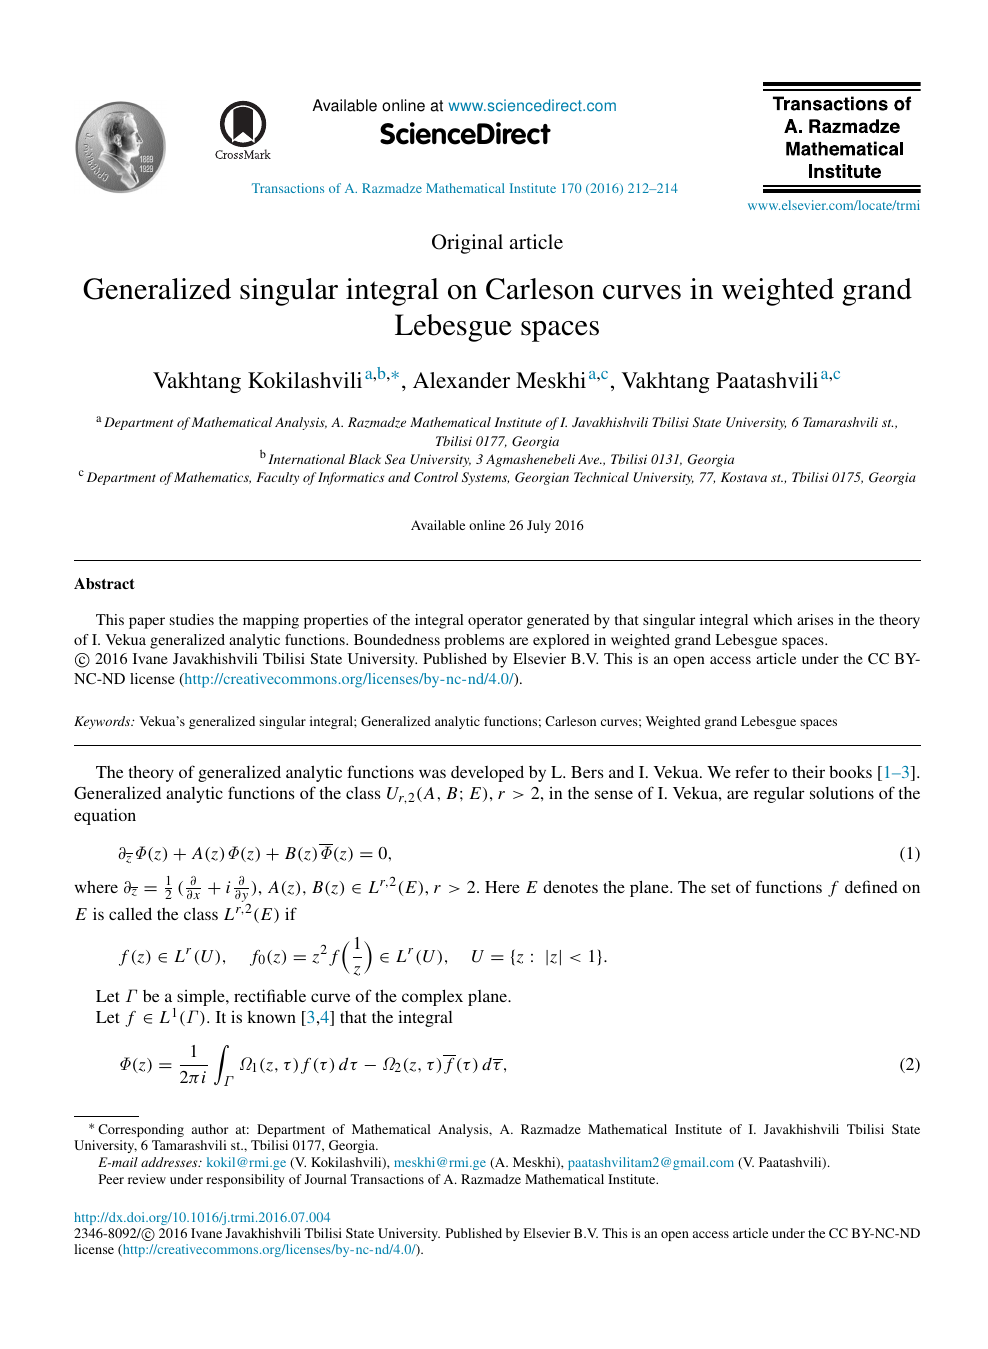 Generalized Singular Integral On Carleson Curves In Weighted Grand Lebesgue Spaces Topic Of Research Paper In Economics And Business Download Scholarly Article Pdf And Read For Free On Cyberleninka Open Science